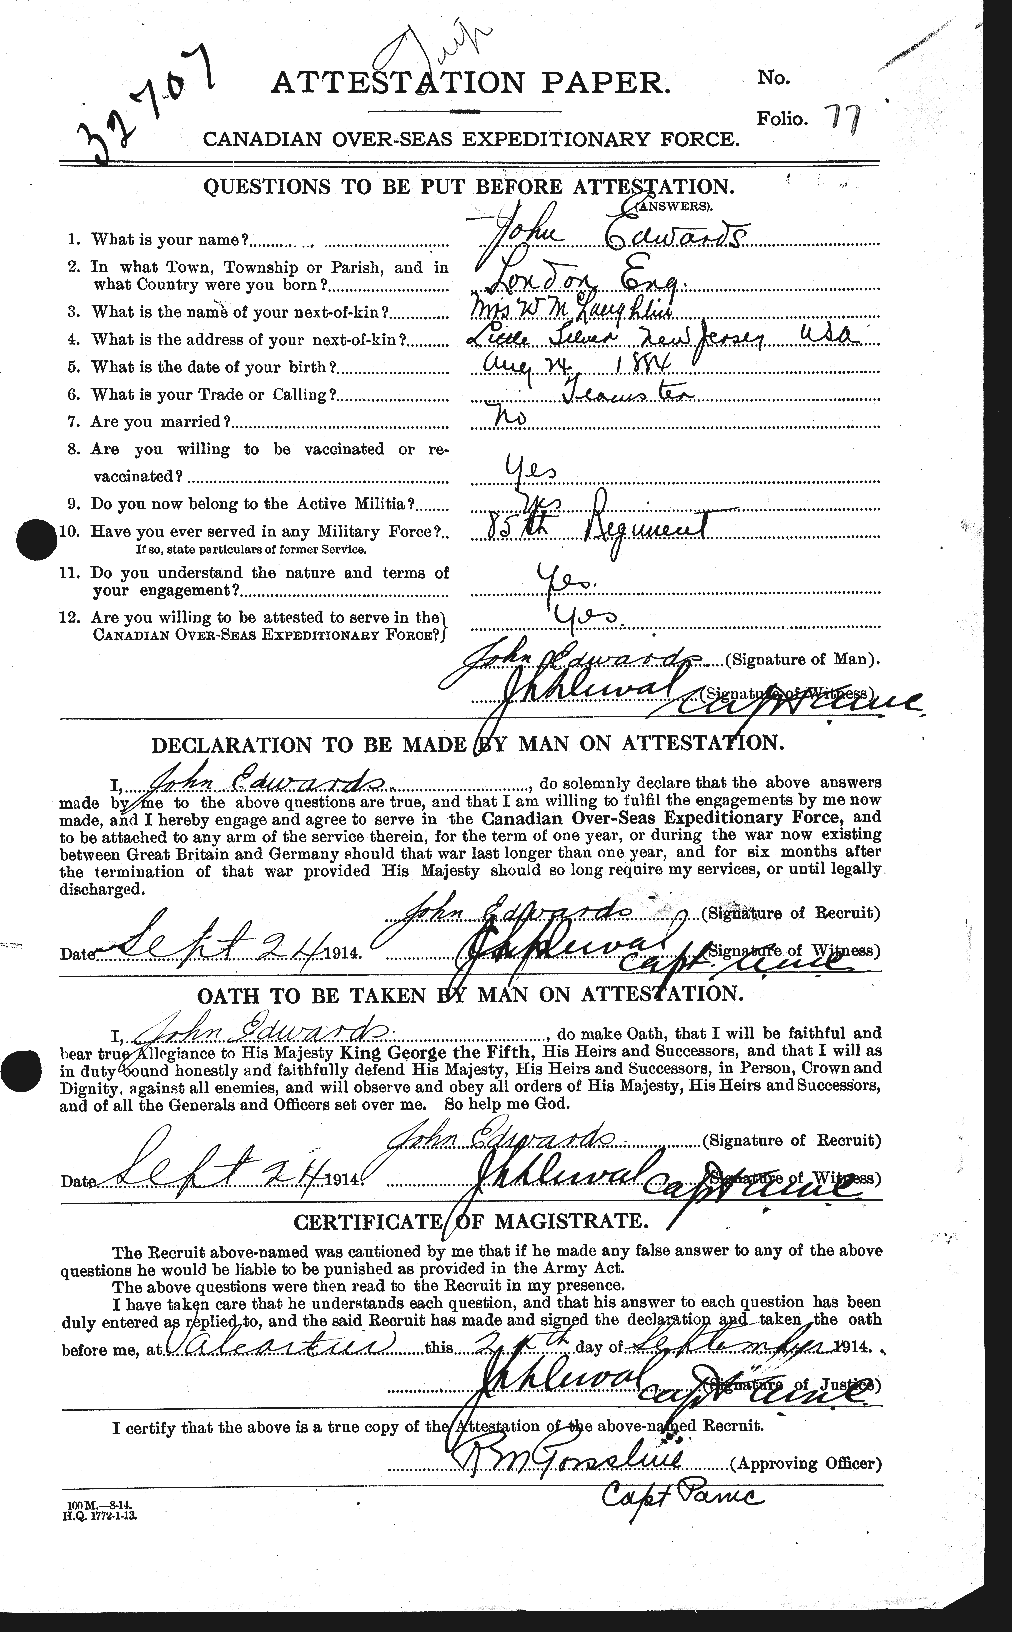 Personnel Records of the First World War - CEF 310109a